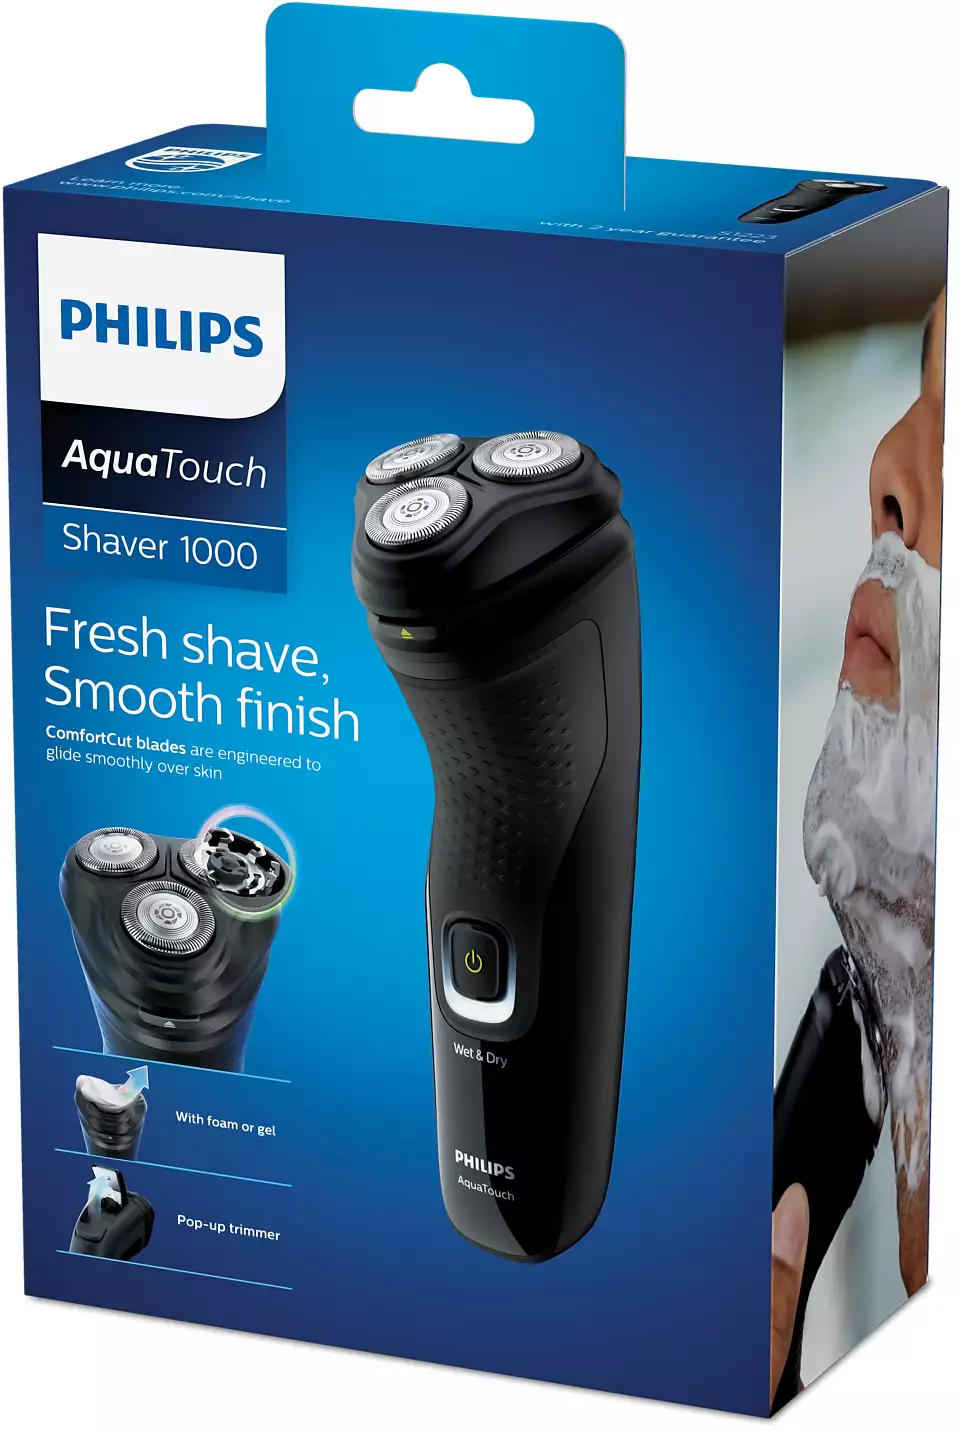 Philips AquaTouch Electric Hair Clipper for men, Wet & Dry use, Black, S1223